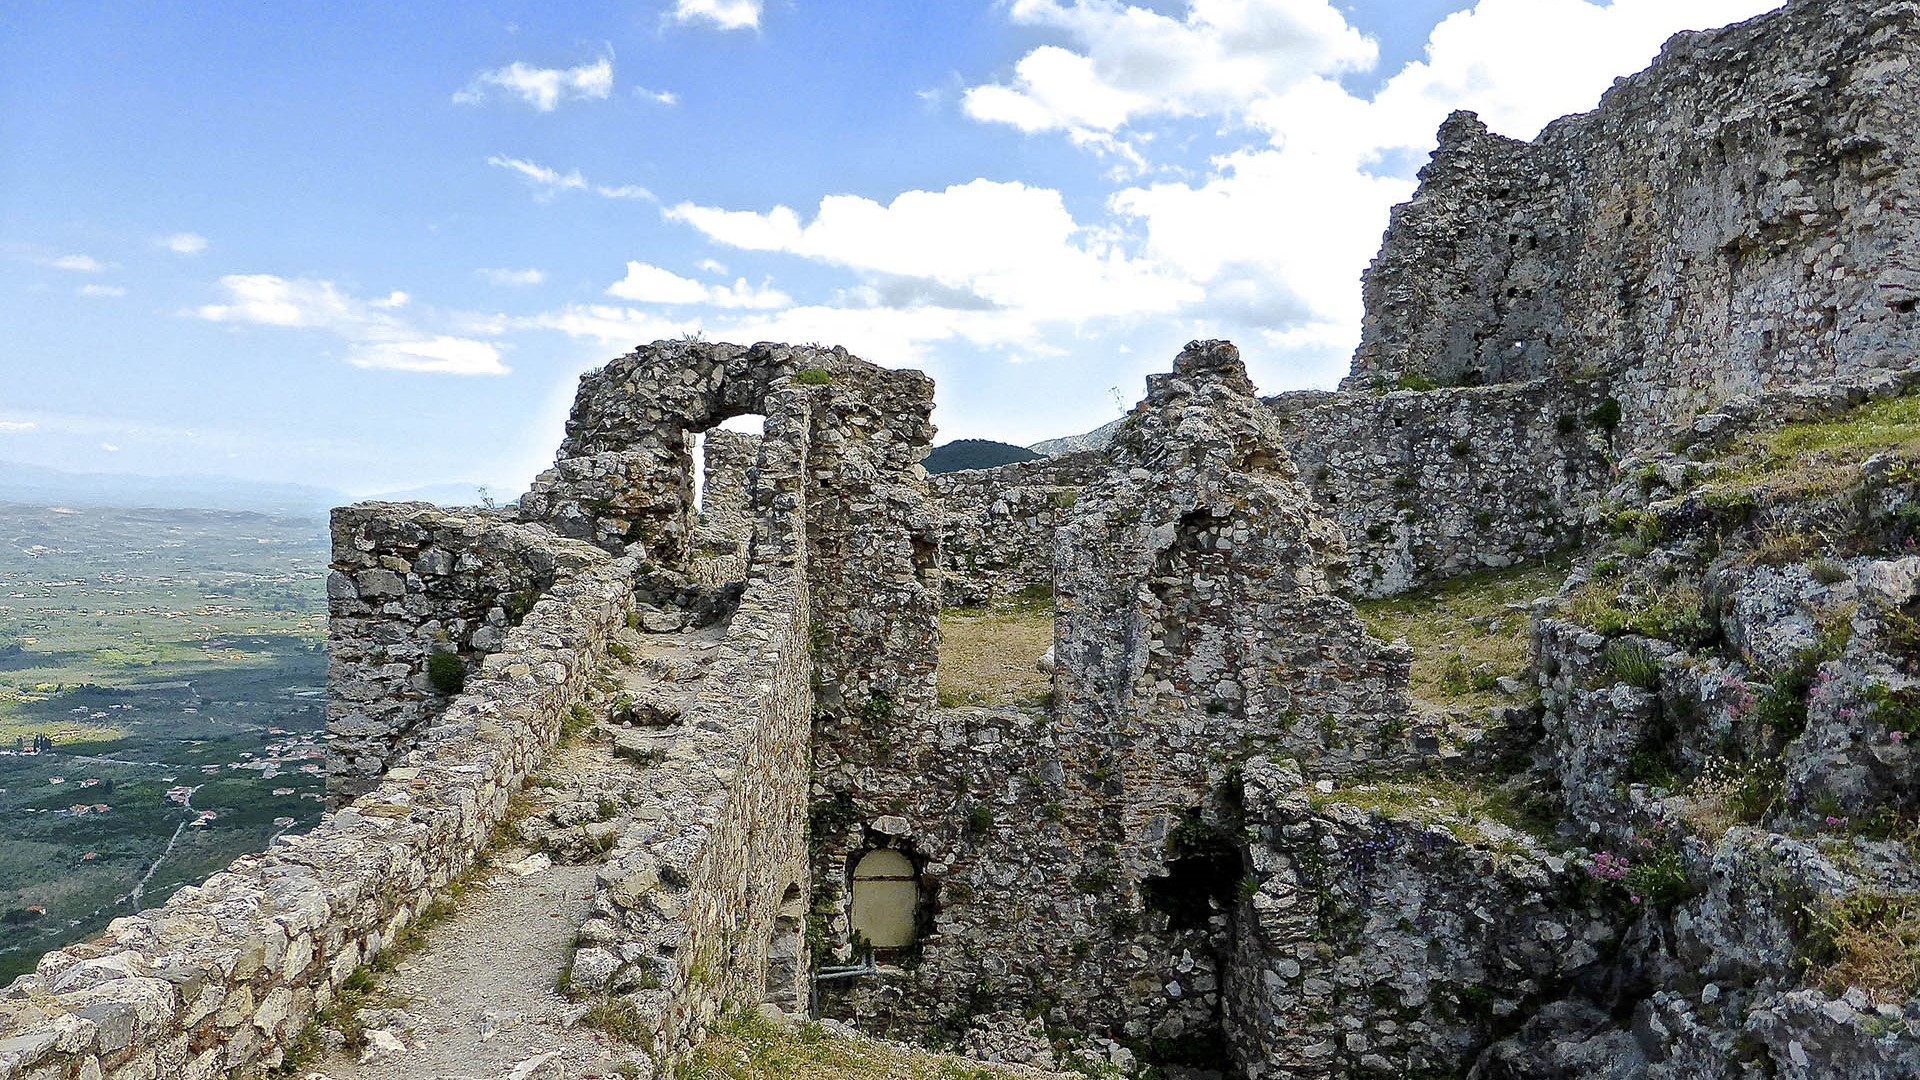 Mystras: The Legendary Byzantine Citadel in the Heart of the Peloponnese